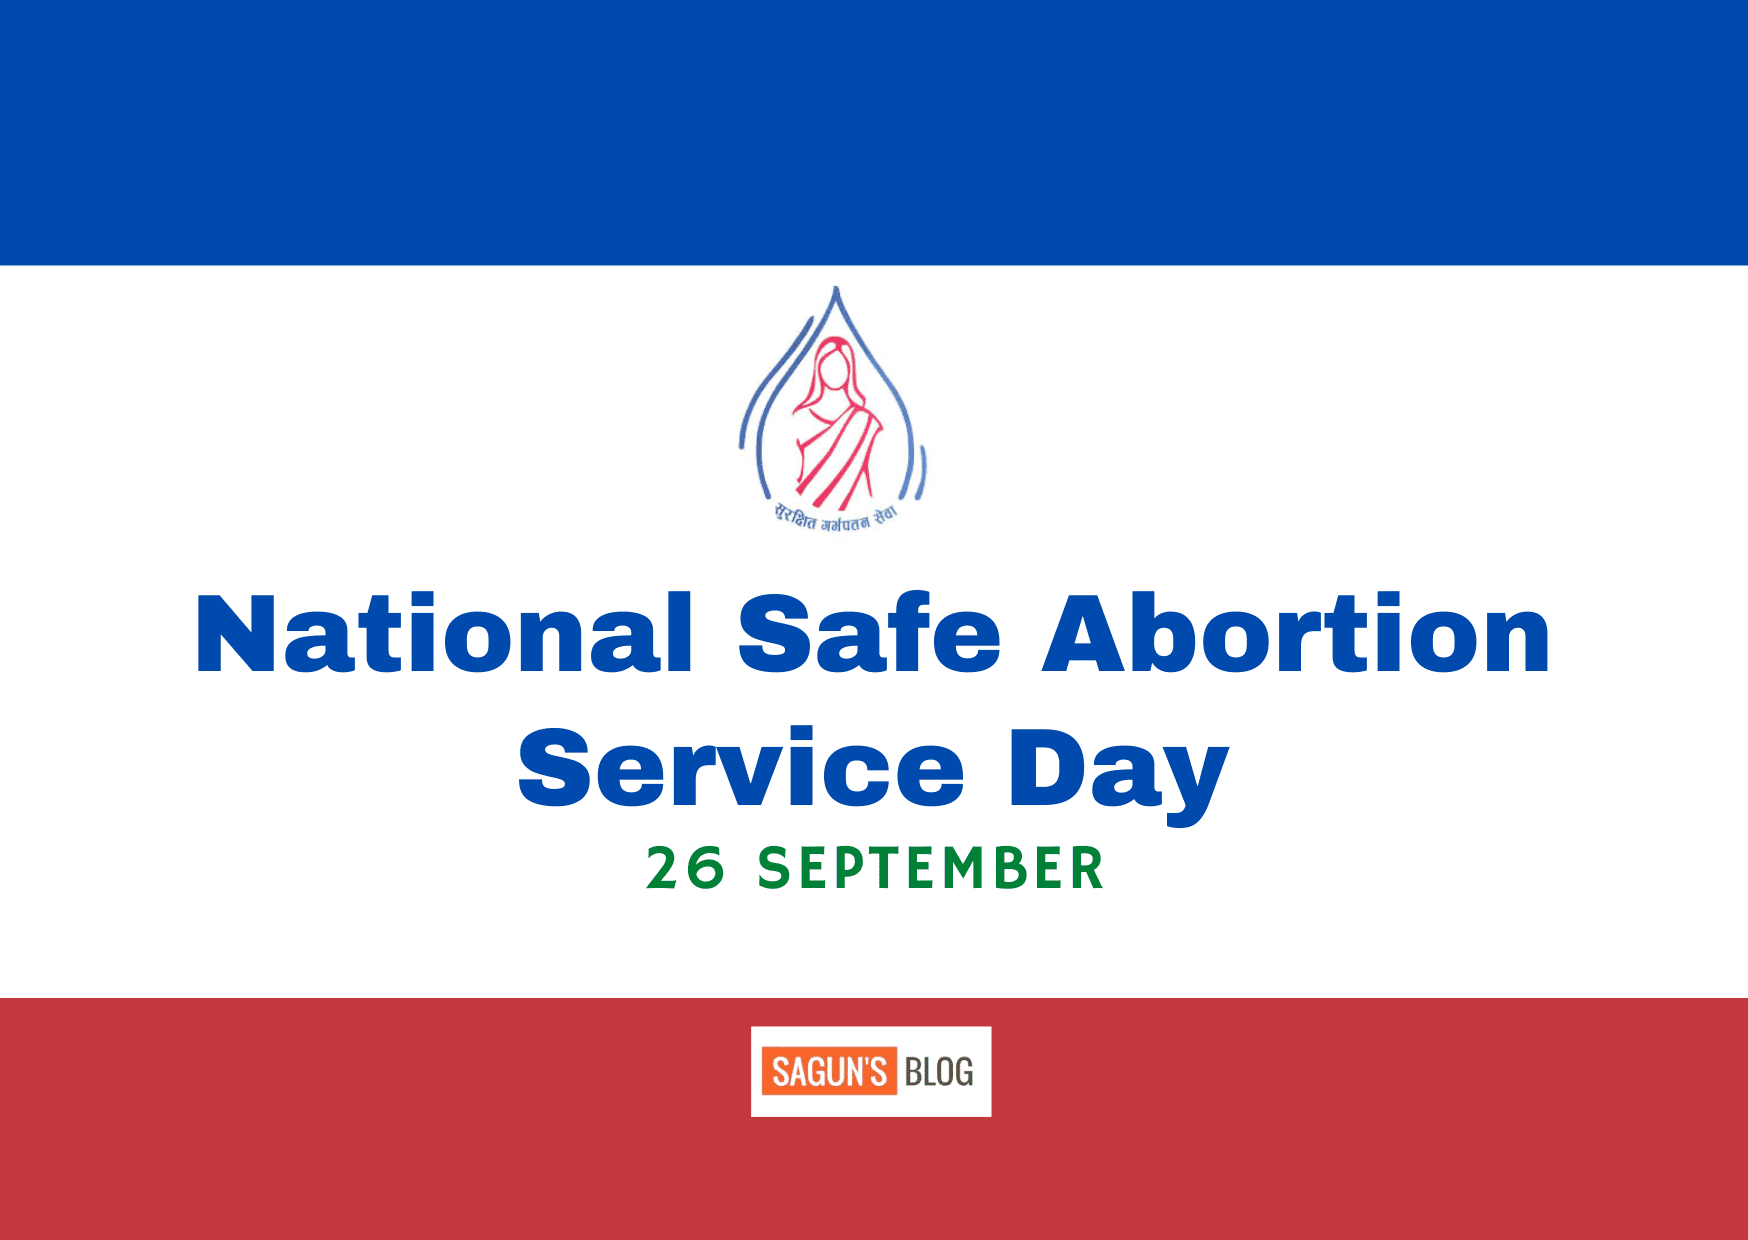 The National Safe Abortion Service Day